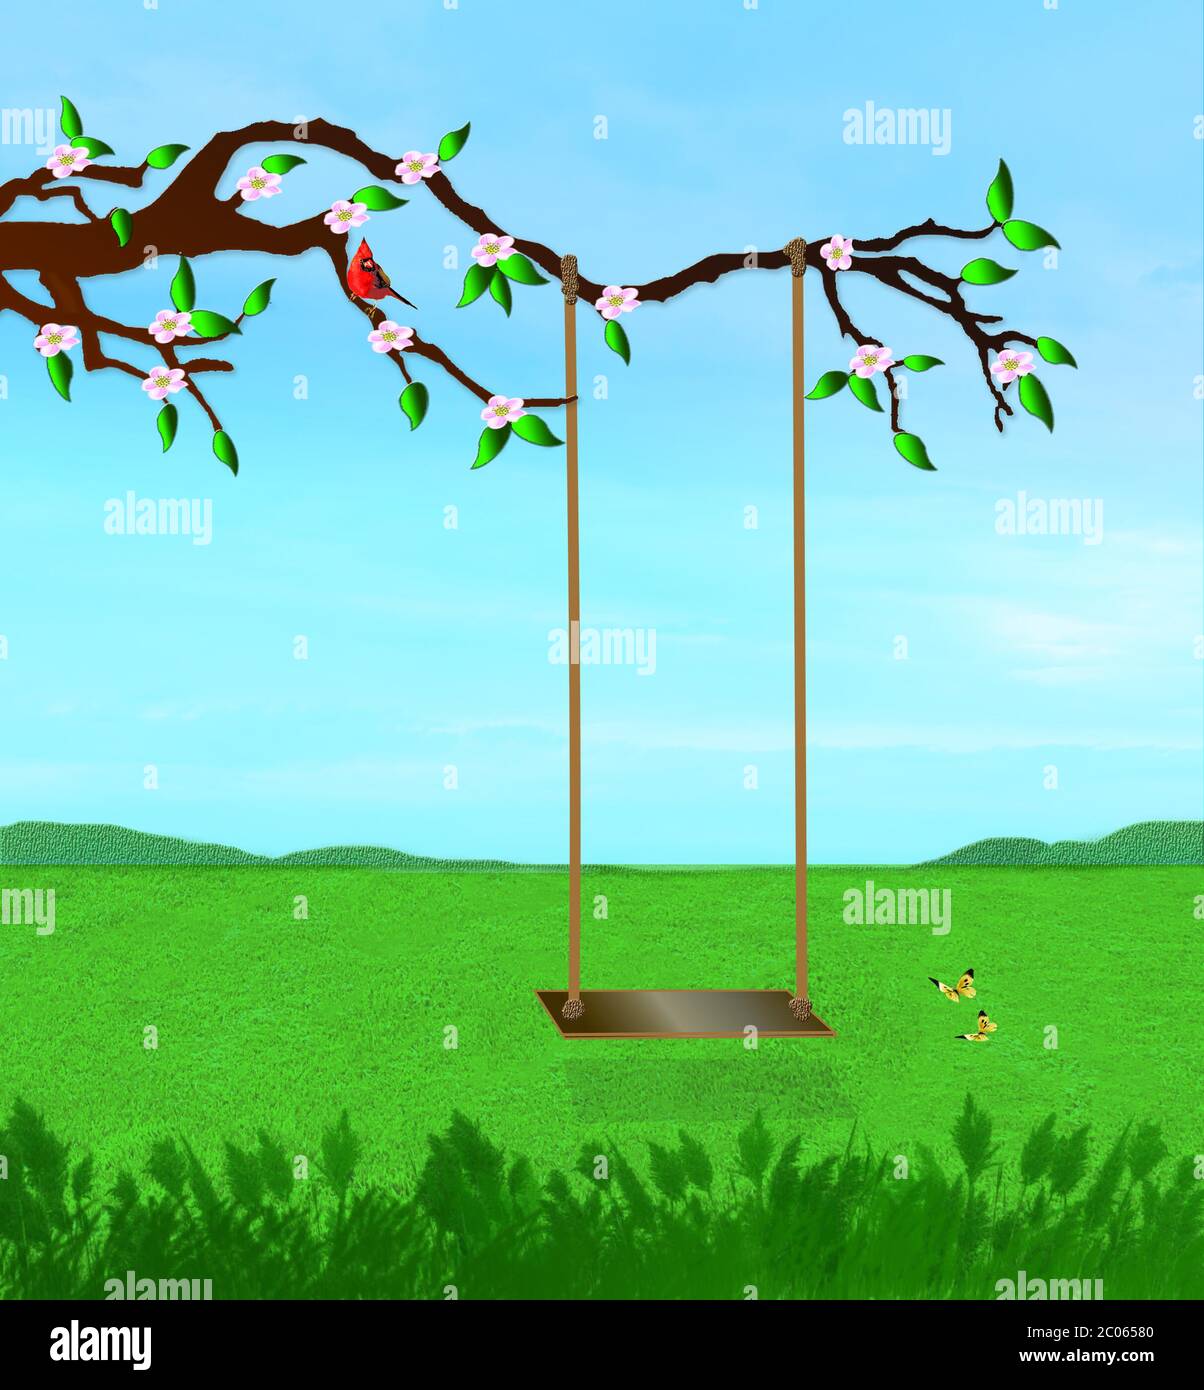 Graphic scene of a hanging swing on a large tree branch with pink flowers.  Butterflies and red cardinal included in image. Stock Photo